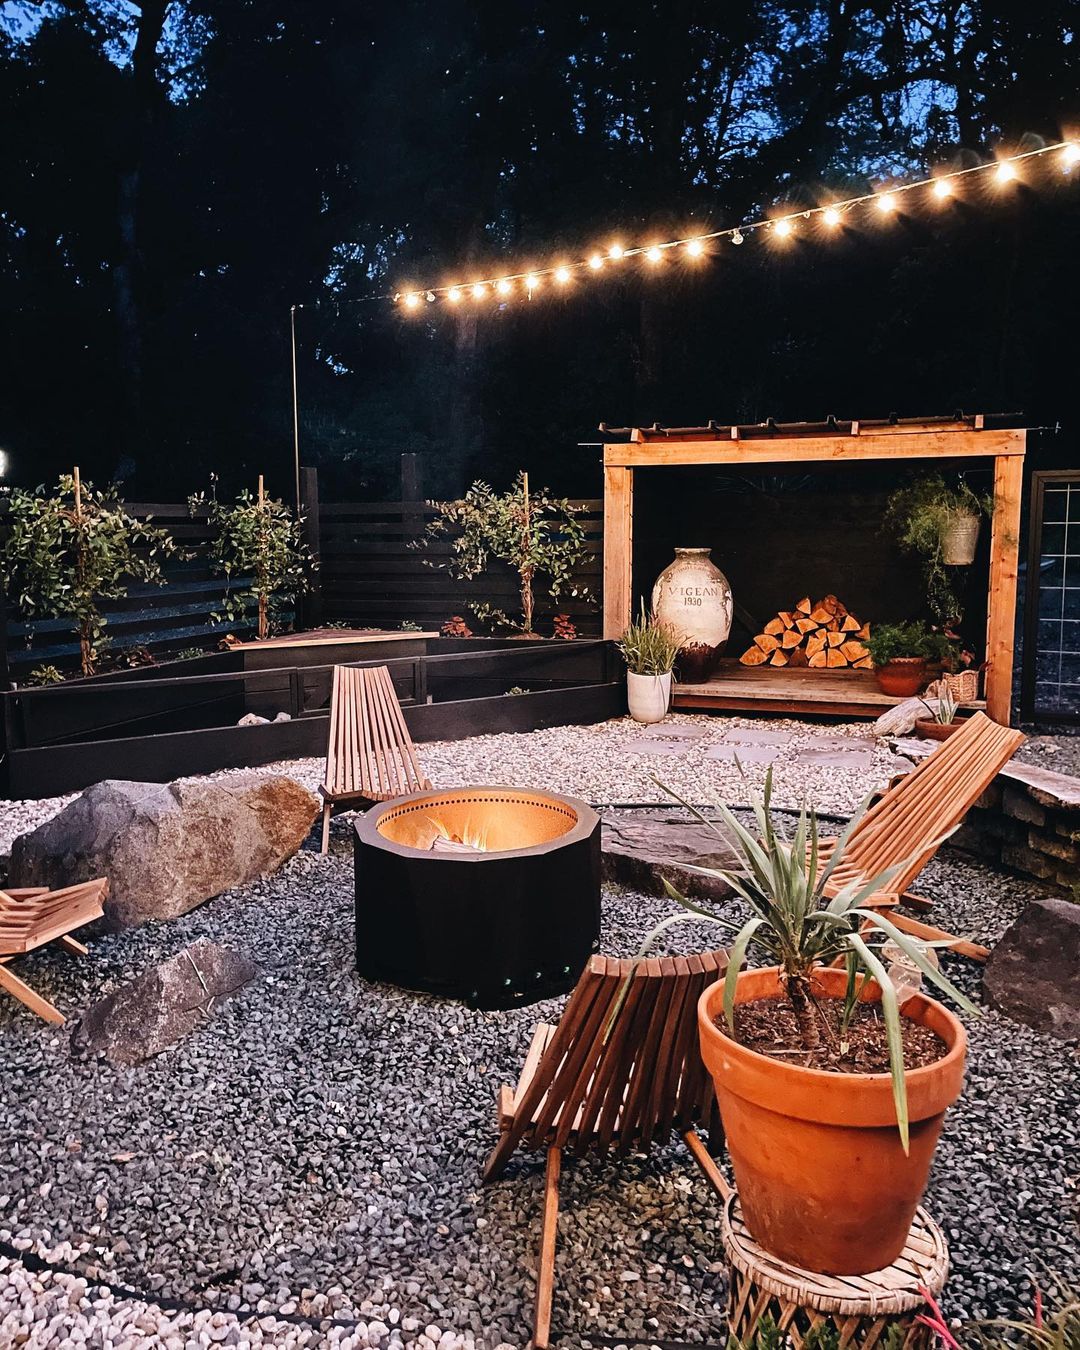 Backyard Seating Area with Fire Pit. Photo by Instagram user @lazyhaven